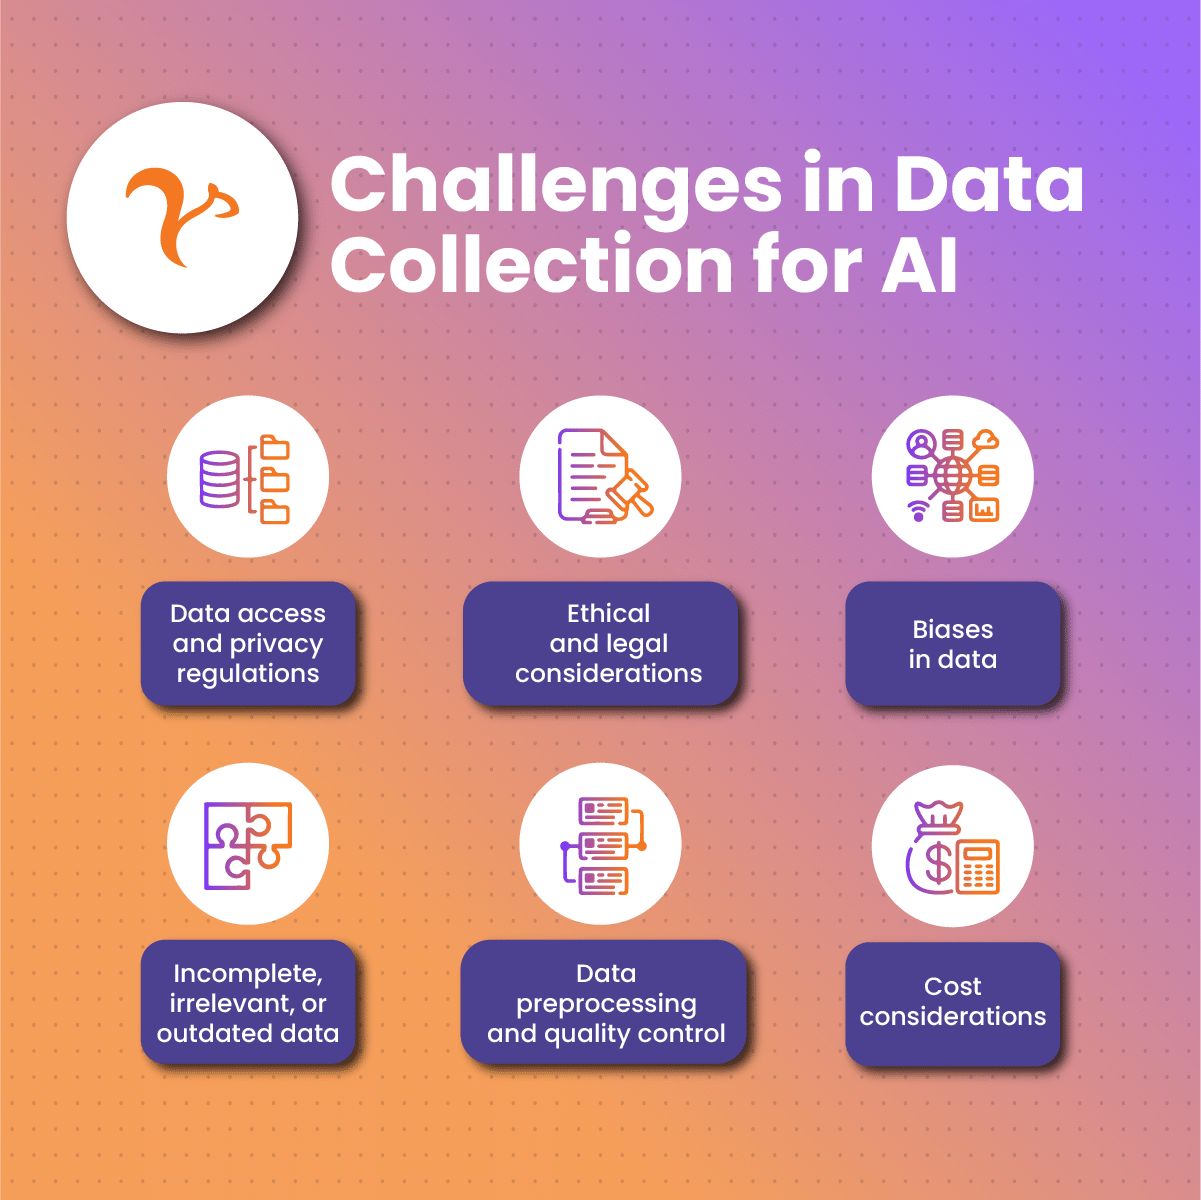 Challenges in Data Collection for AI